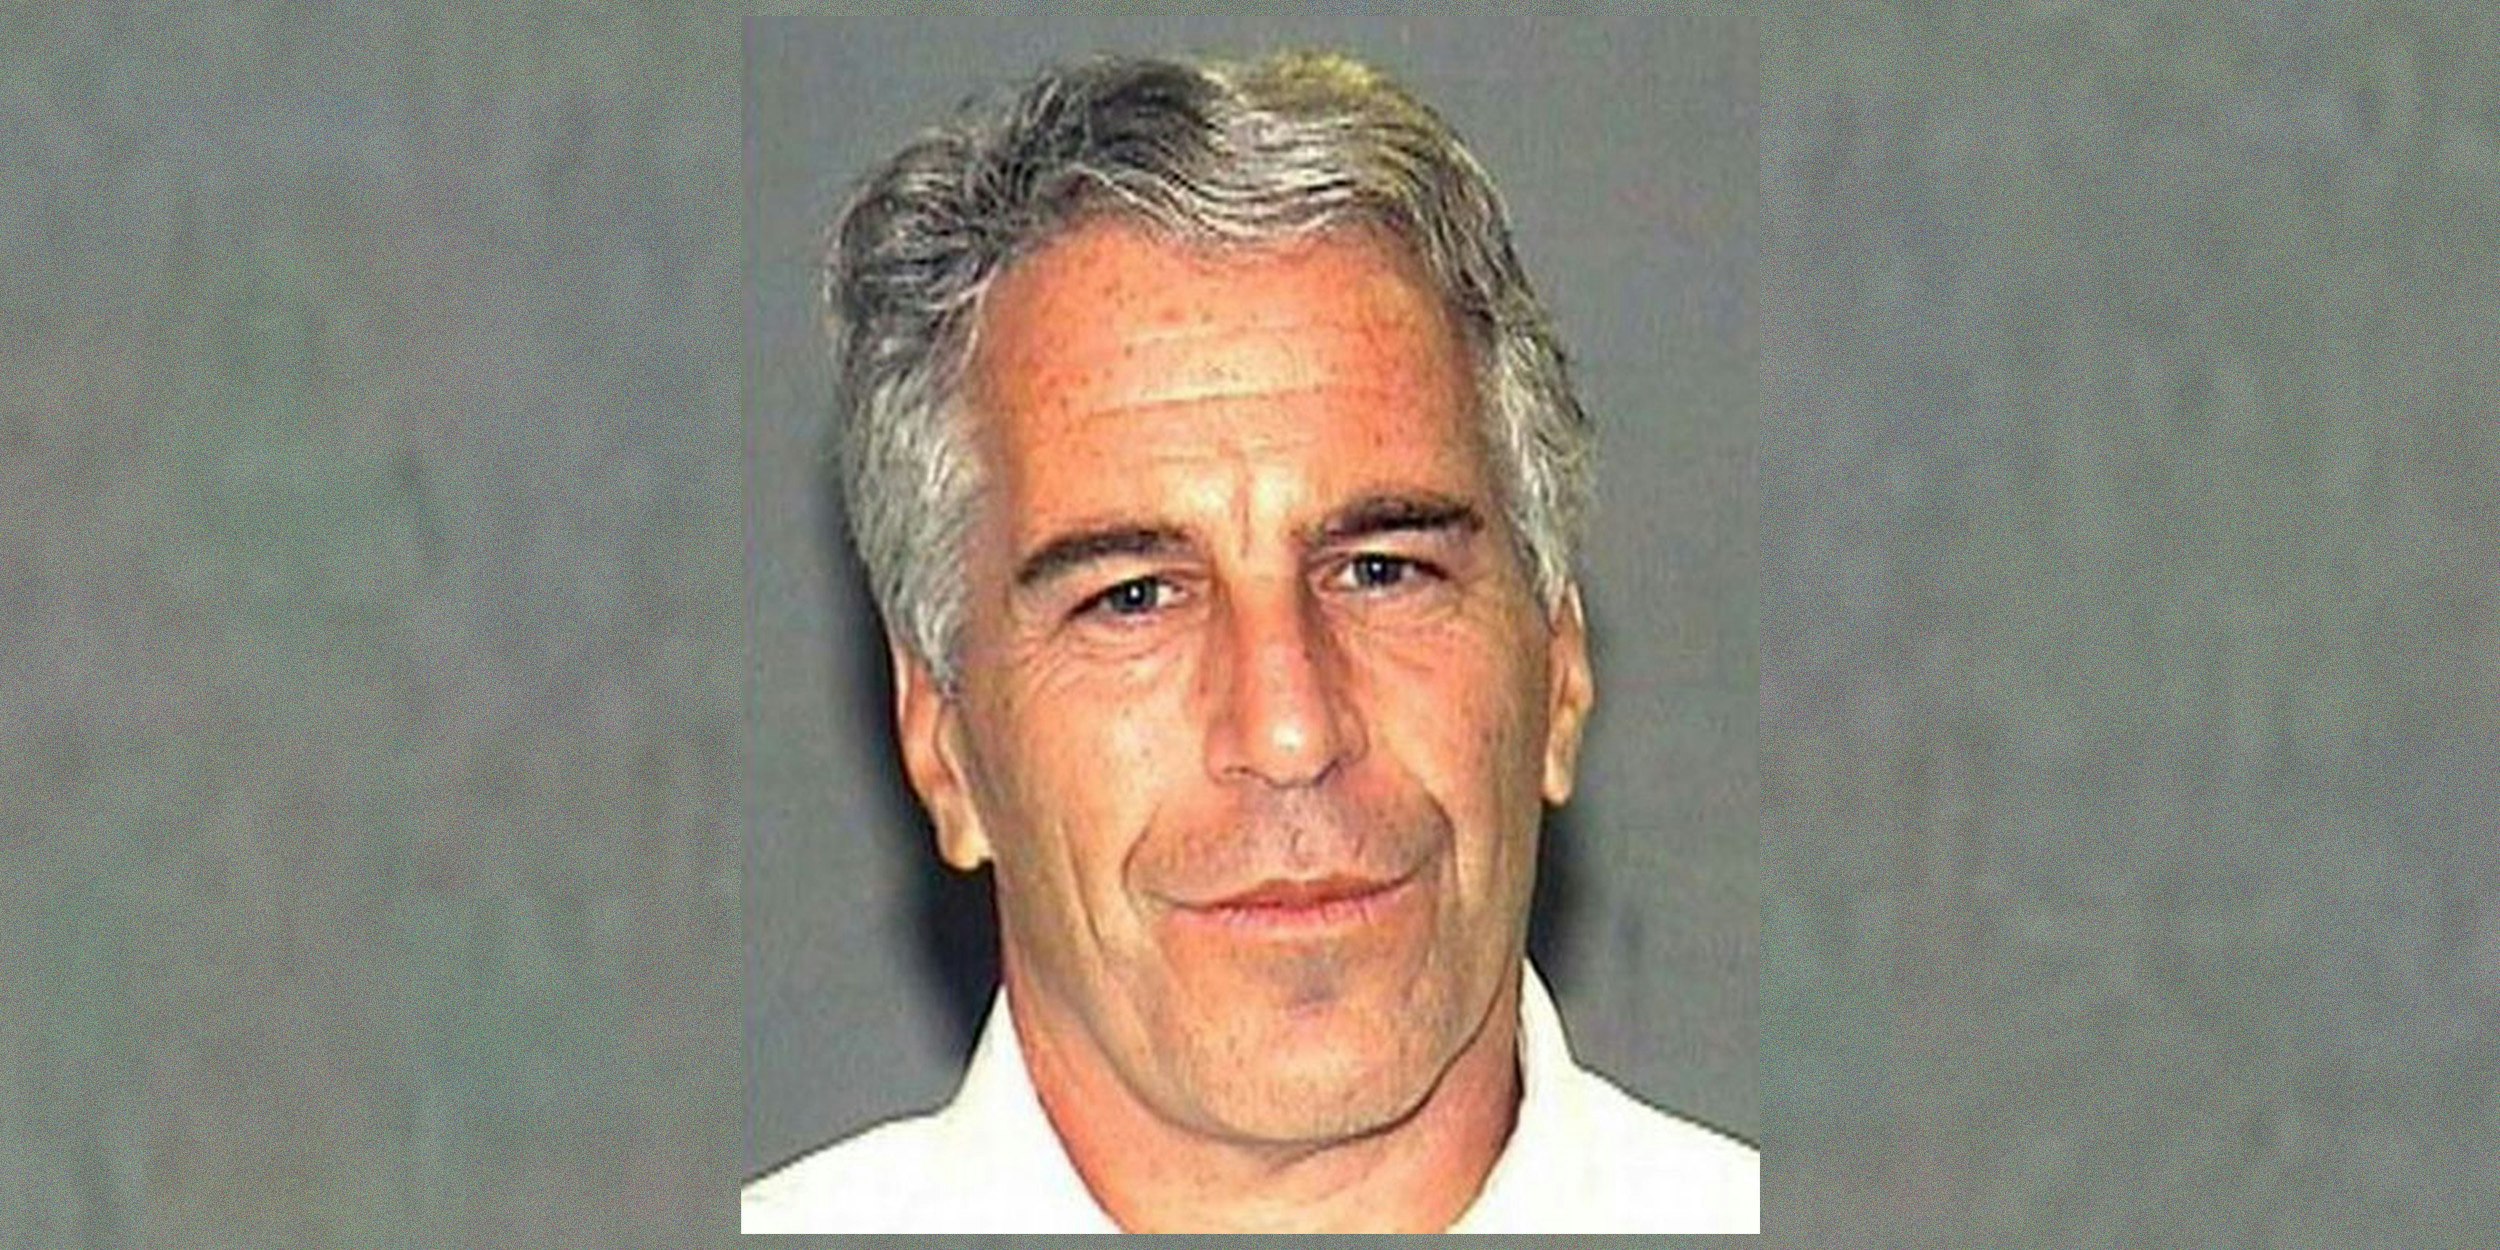 Report Jeffrey Epstein Wanted To Impregnate Women At His Ranch